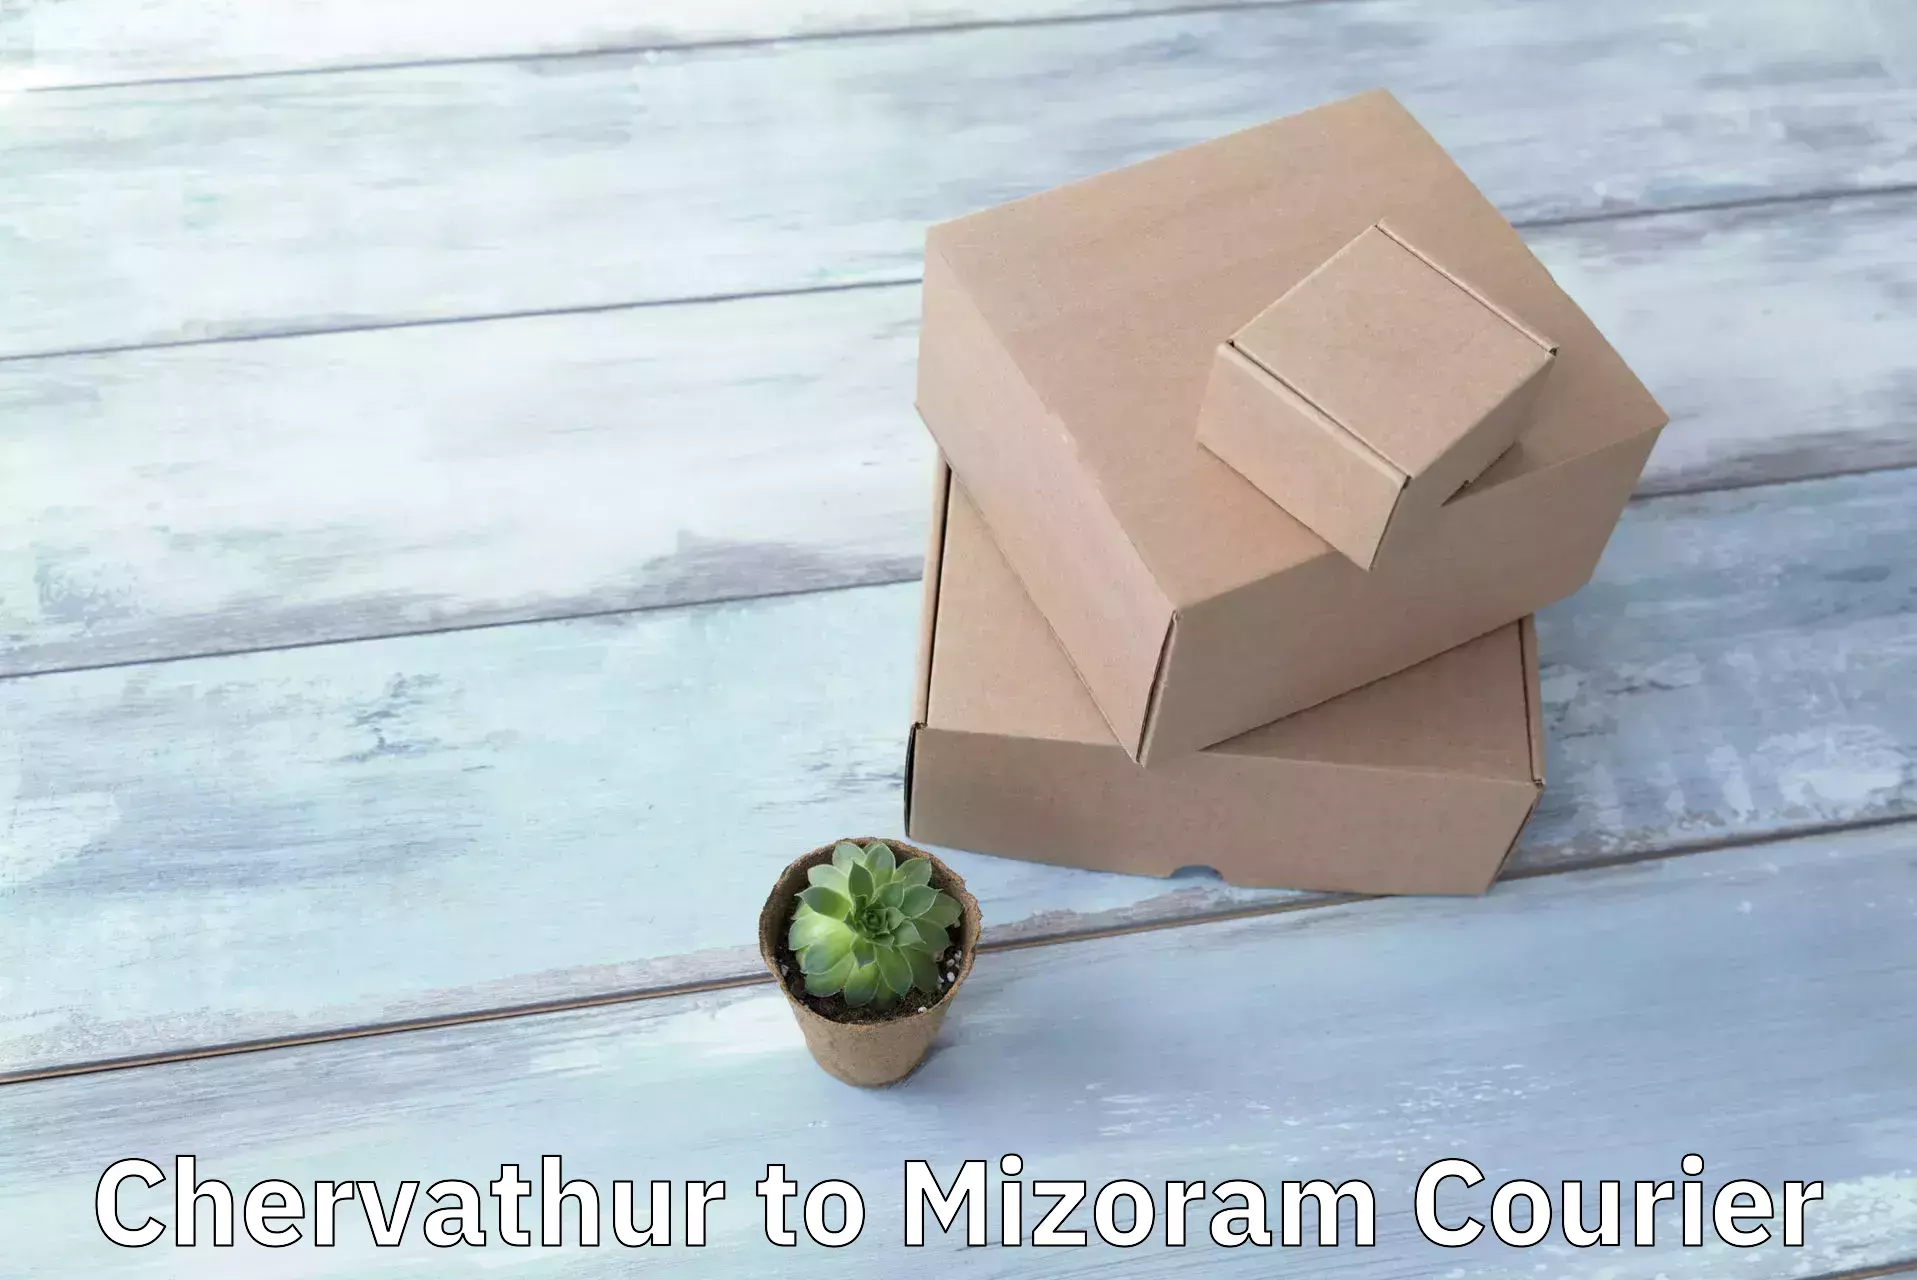 High value parcel delivery in Chervathur to Mizoram